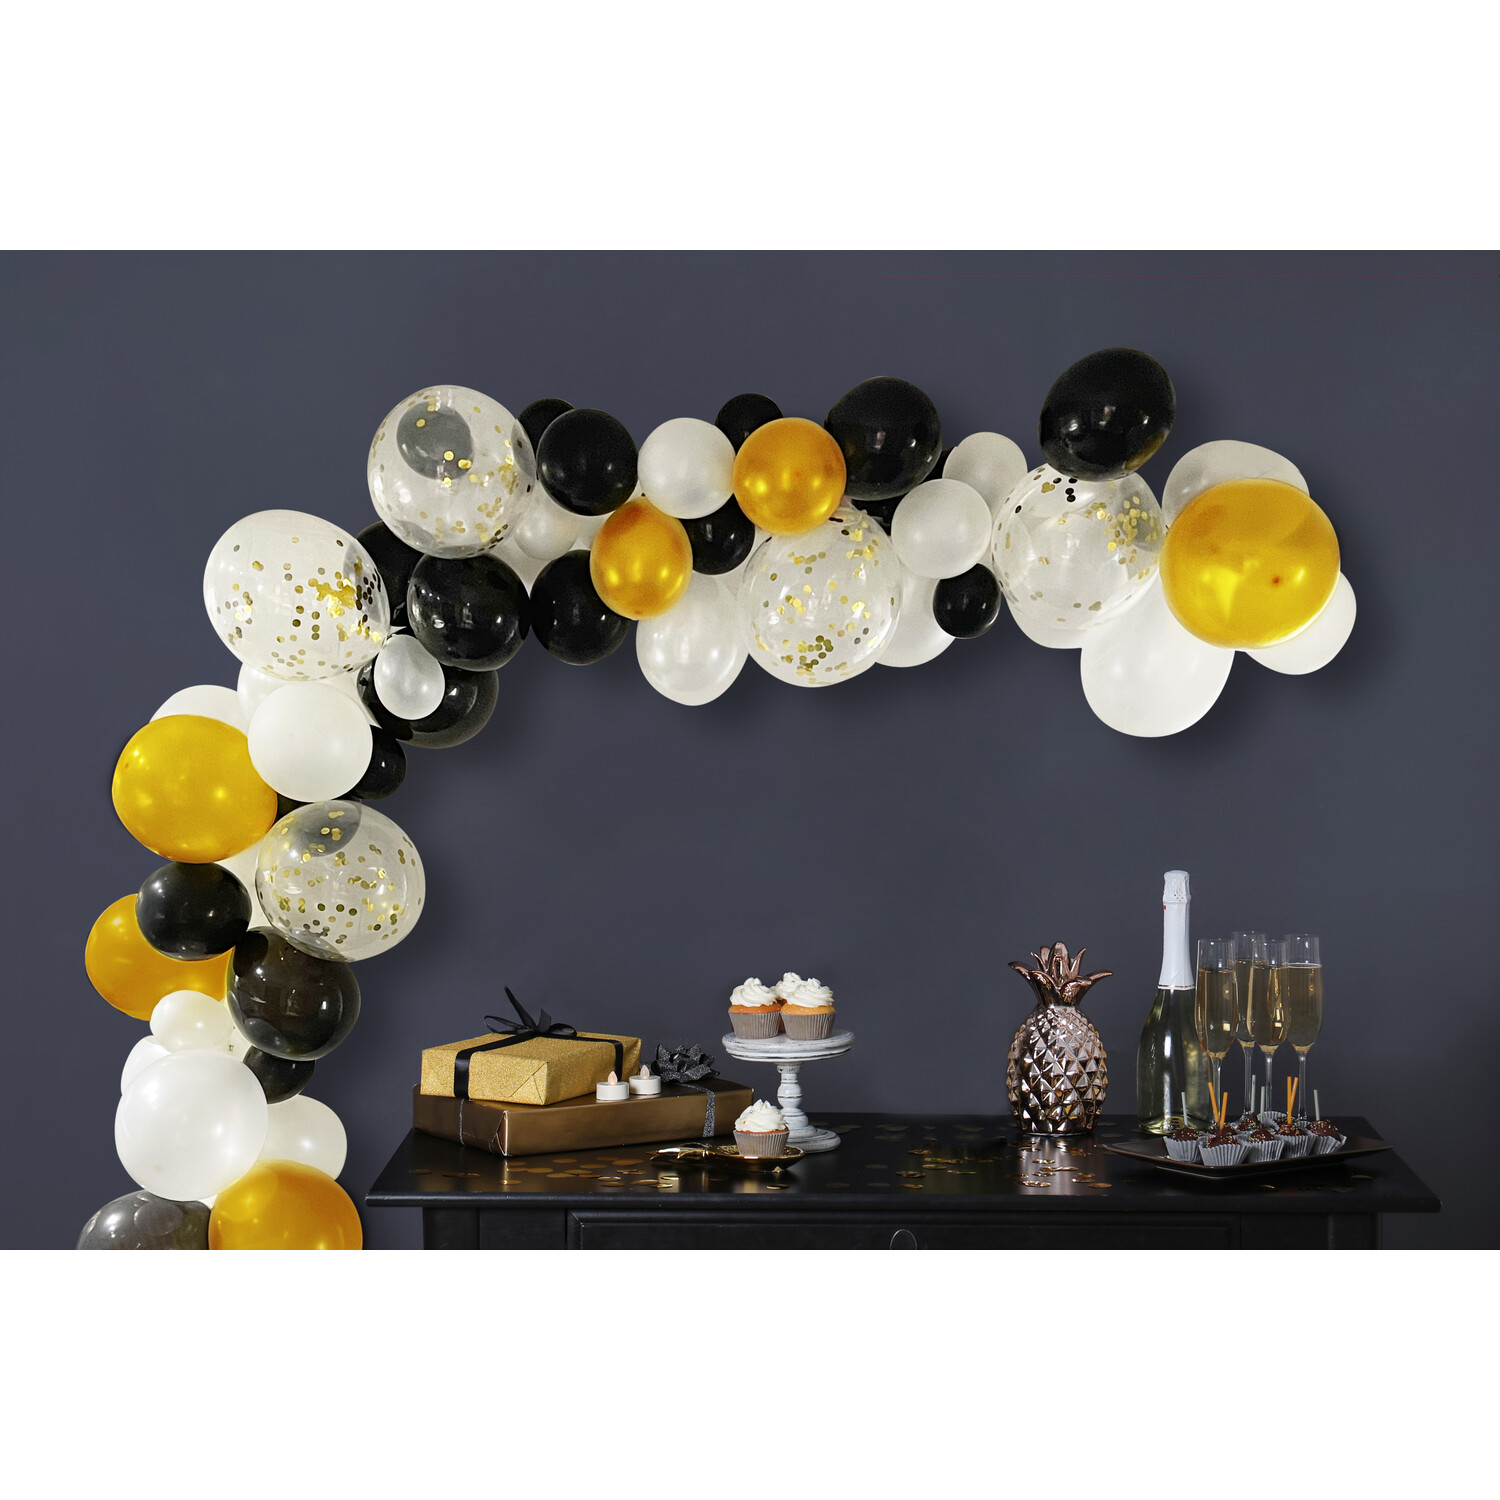 80 Piece Black and Gold Balloon Arch Kit Image